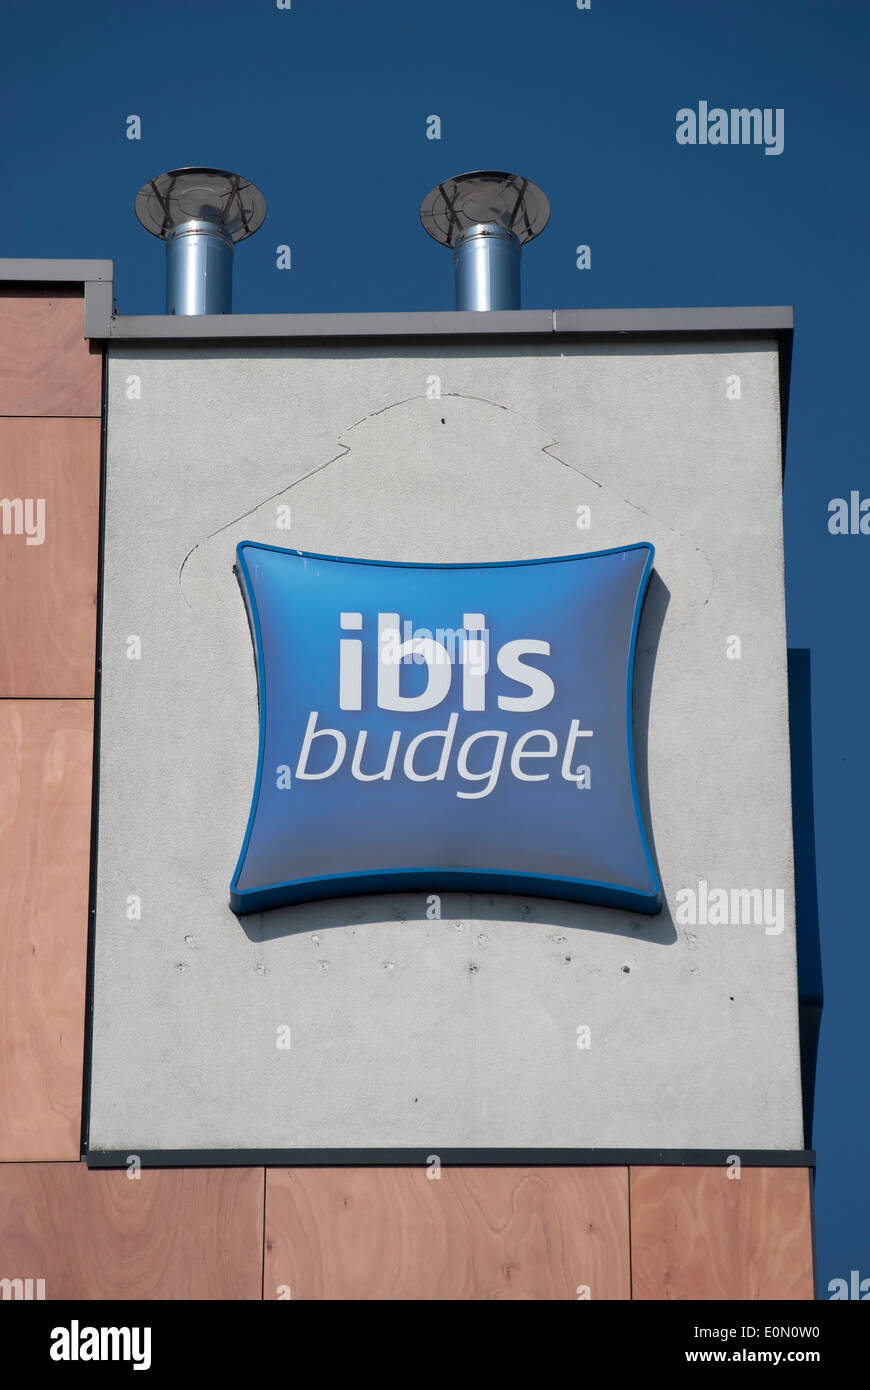 logo sign of an ibis budget hotel in hounslow, middlesex, england Stock Photo